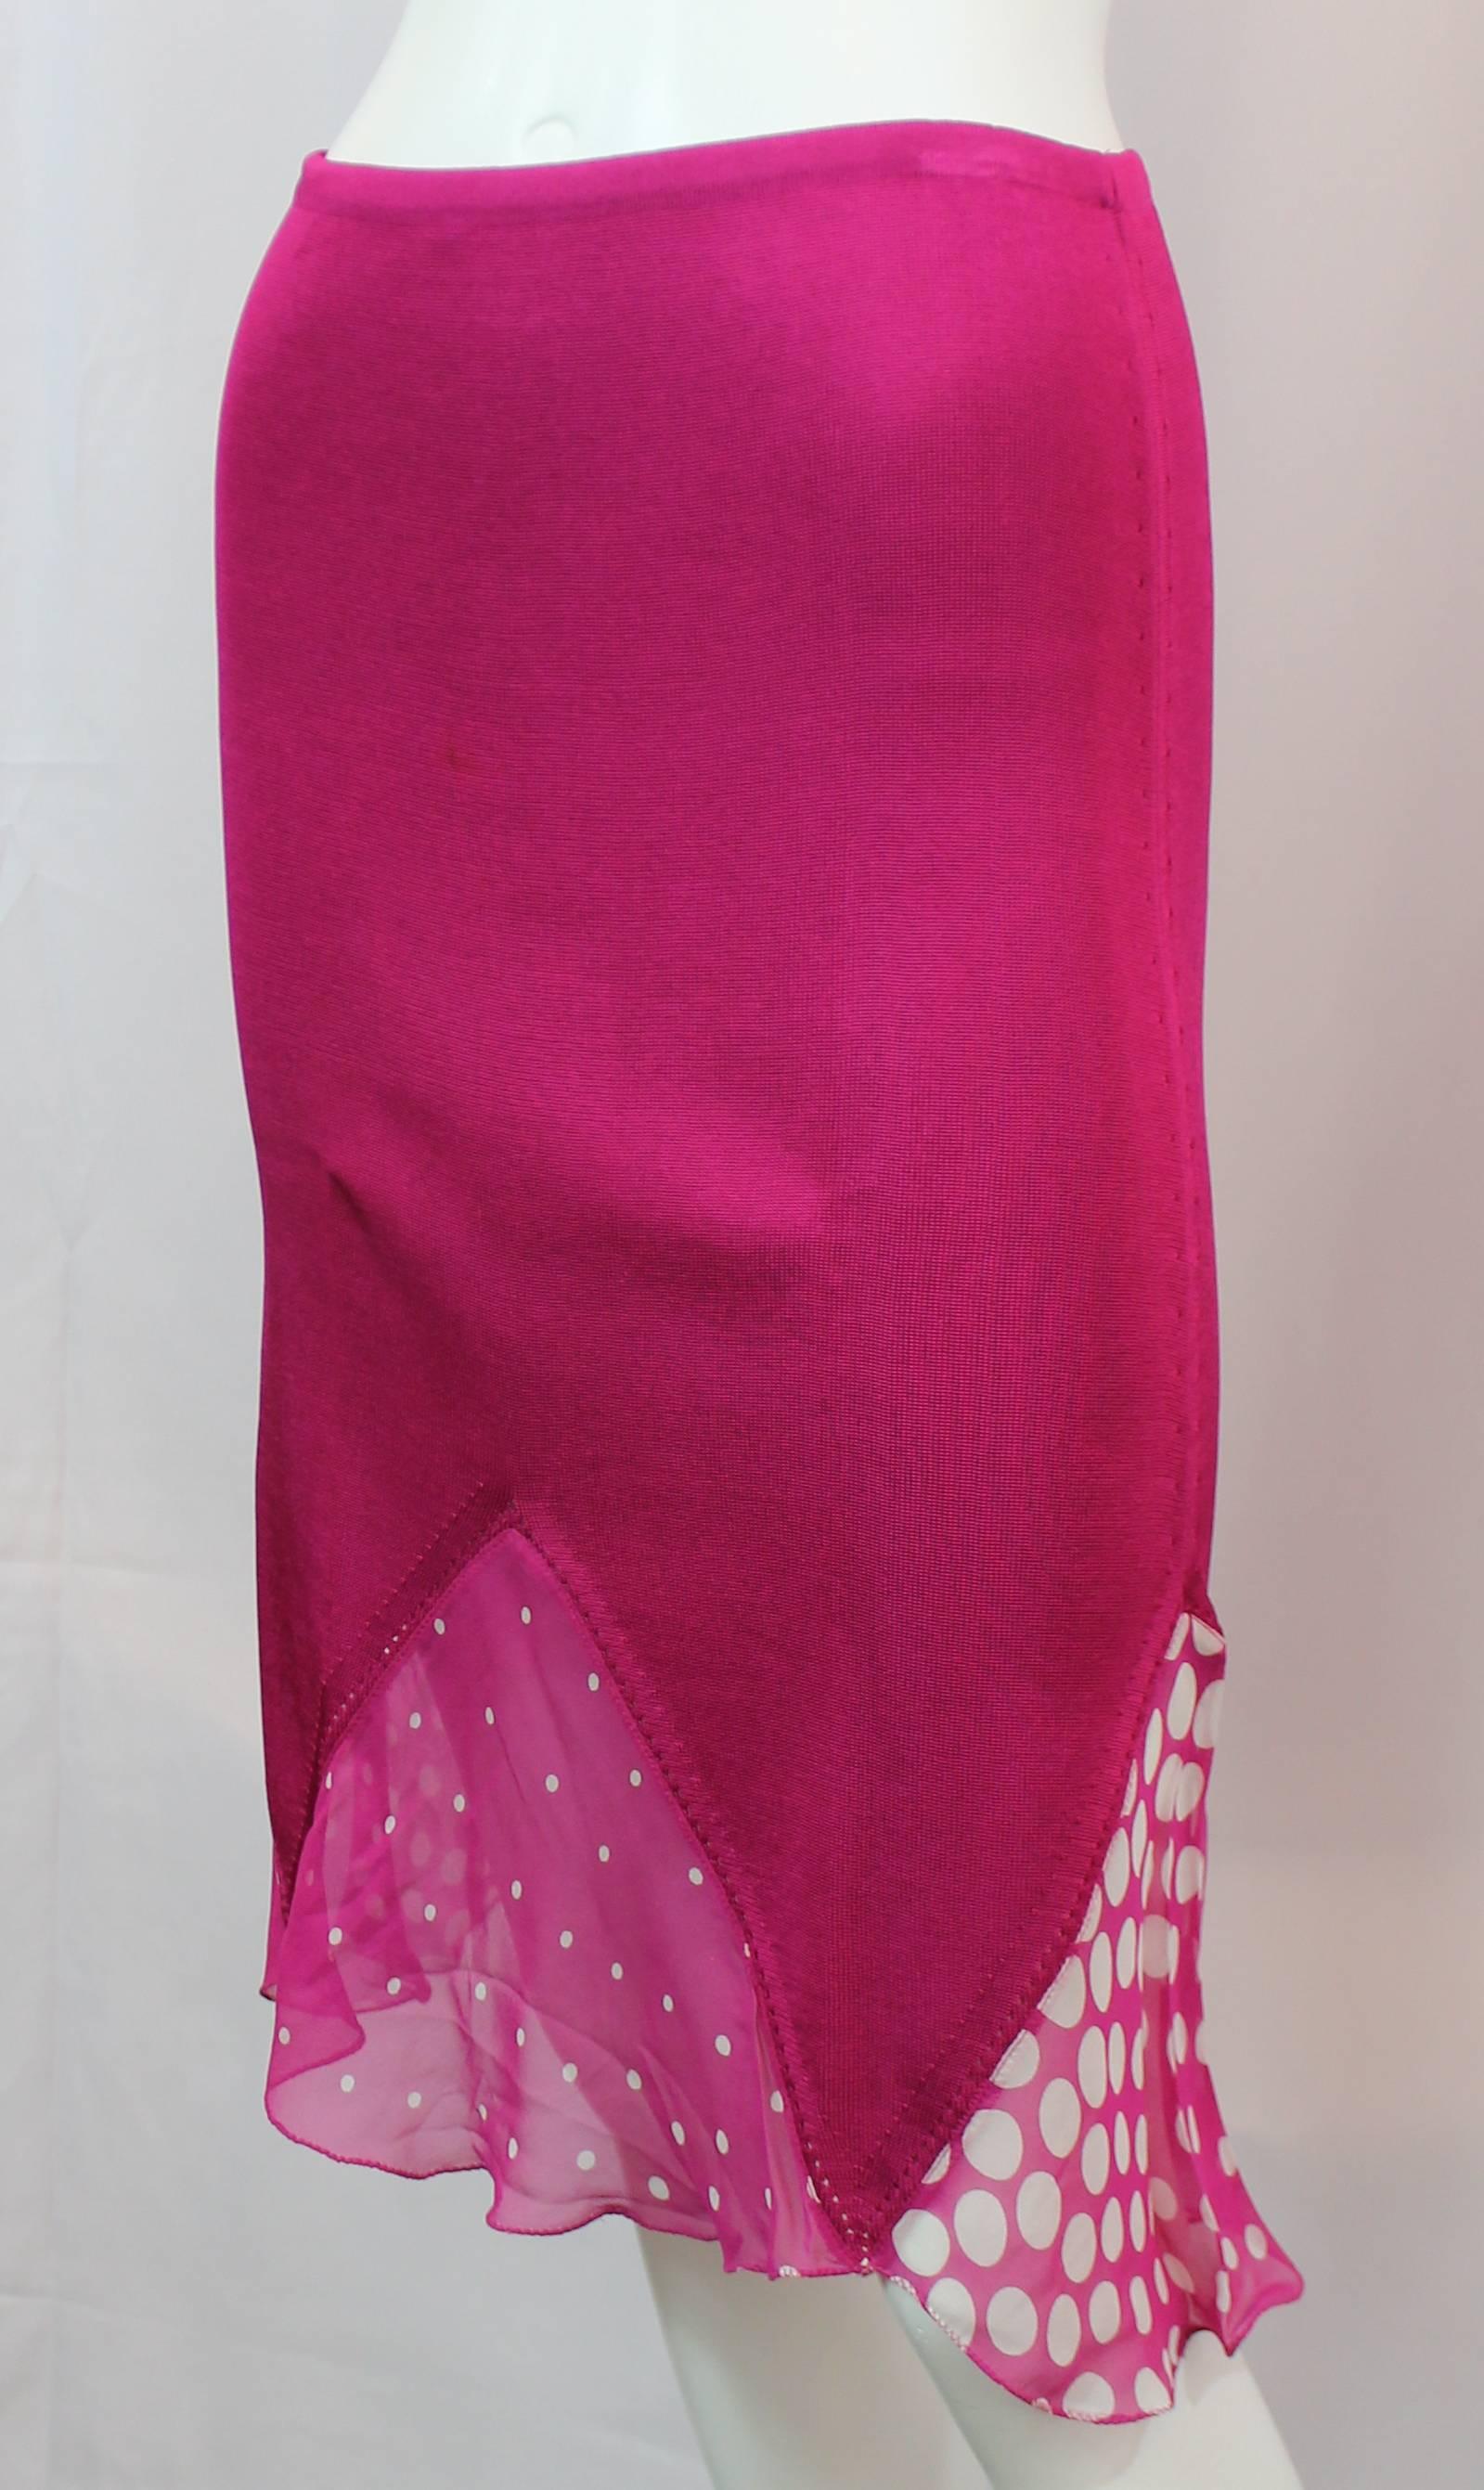 Christian Lacroix Vintage Magenta Knitted Skirt - 4 - 1990's. This fun knitted skirt is magenta with polka dot silk chiffon detail at the bottom. There is an elastic band at the waist and some perforation detailing. It is in excellent